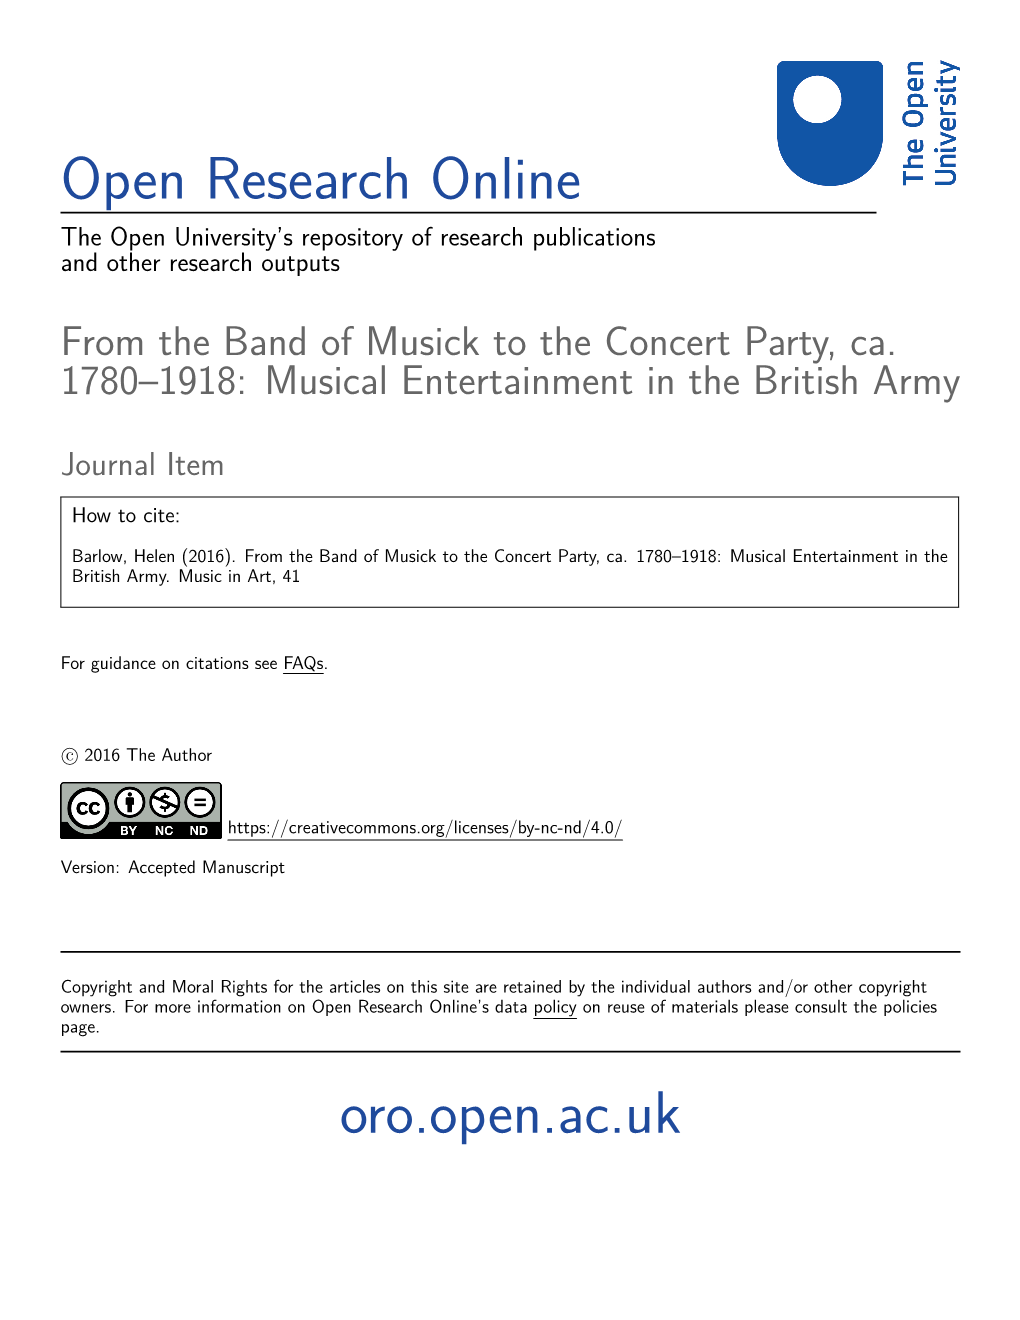 Musical Entertainment in the British Army